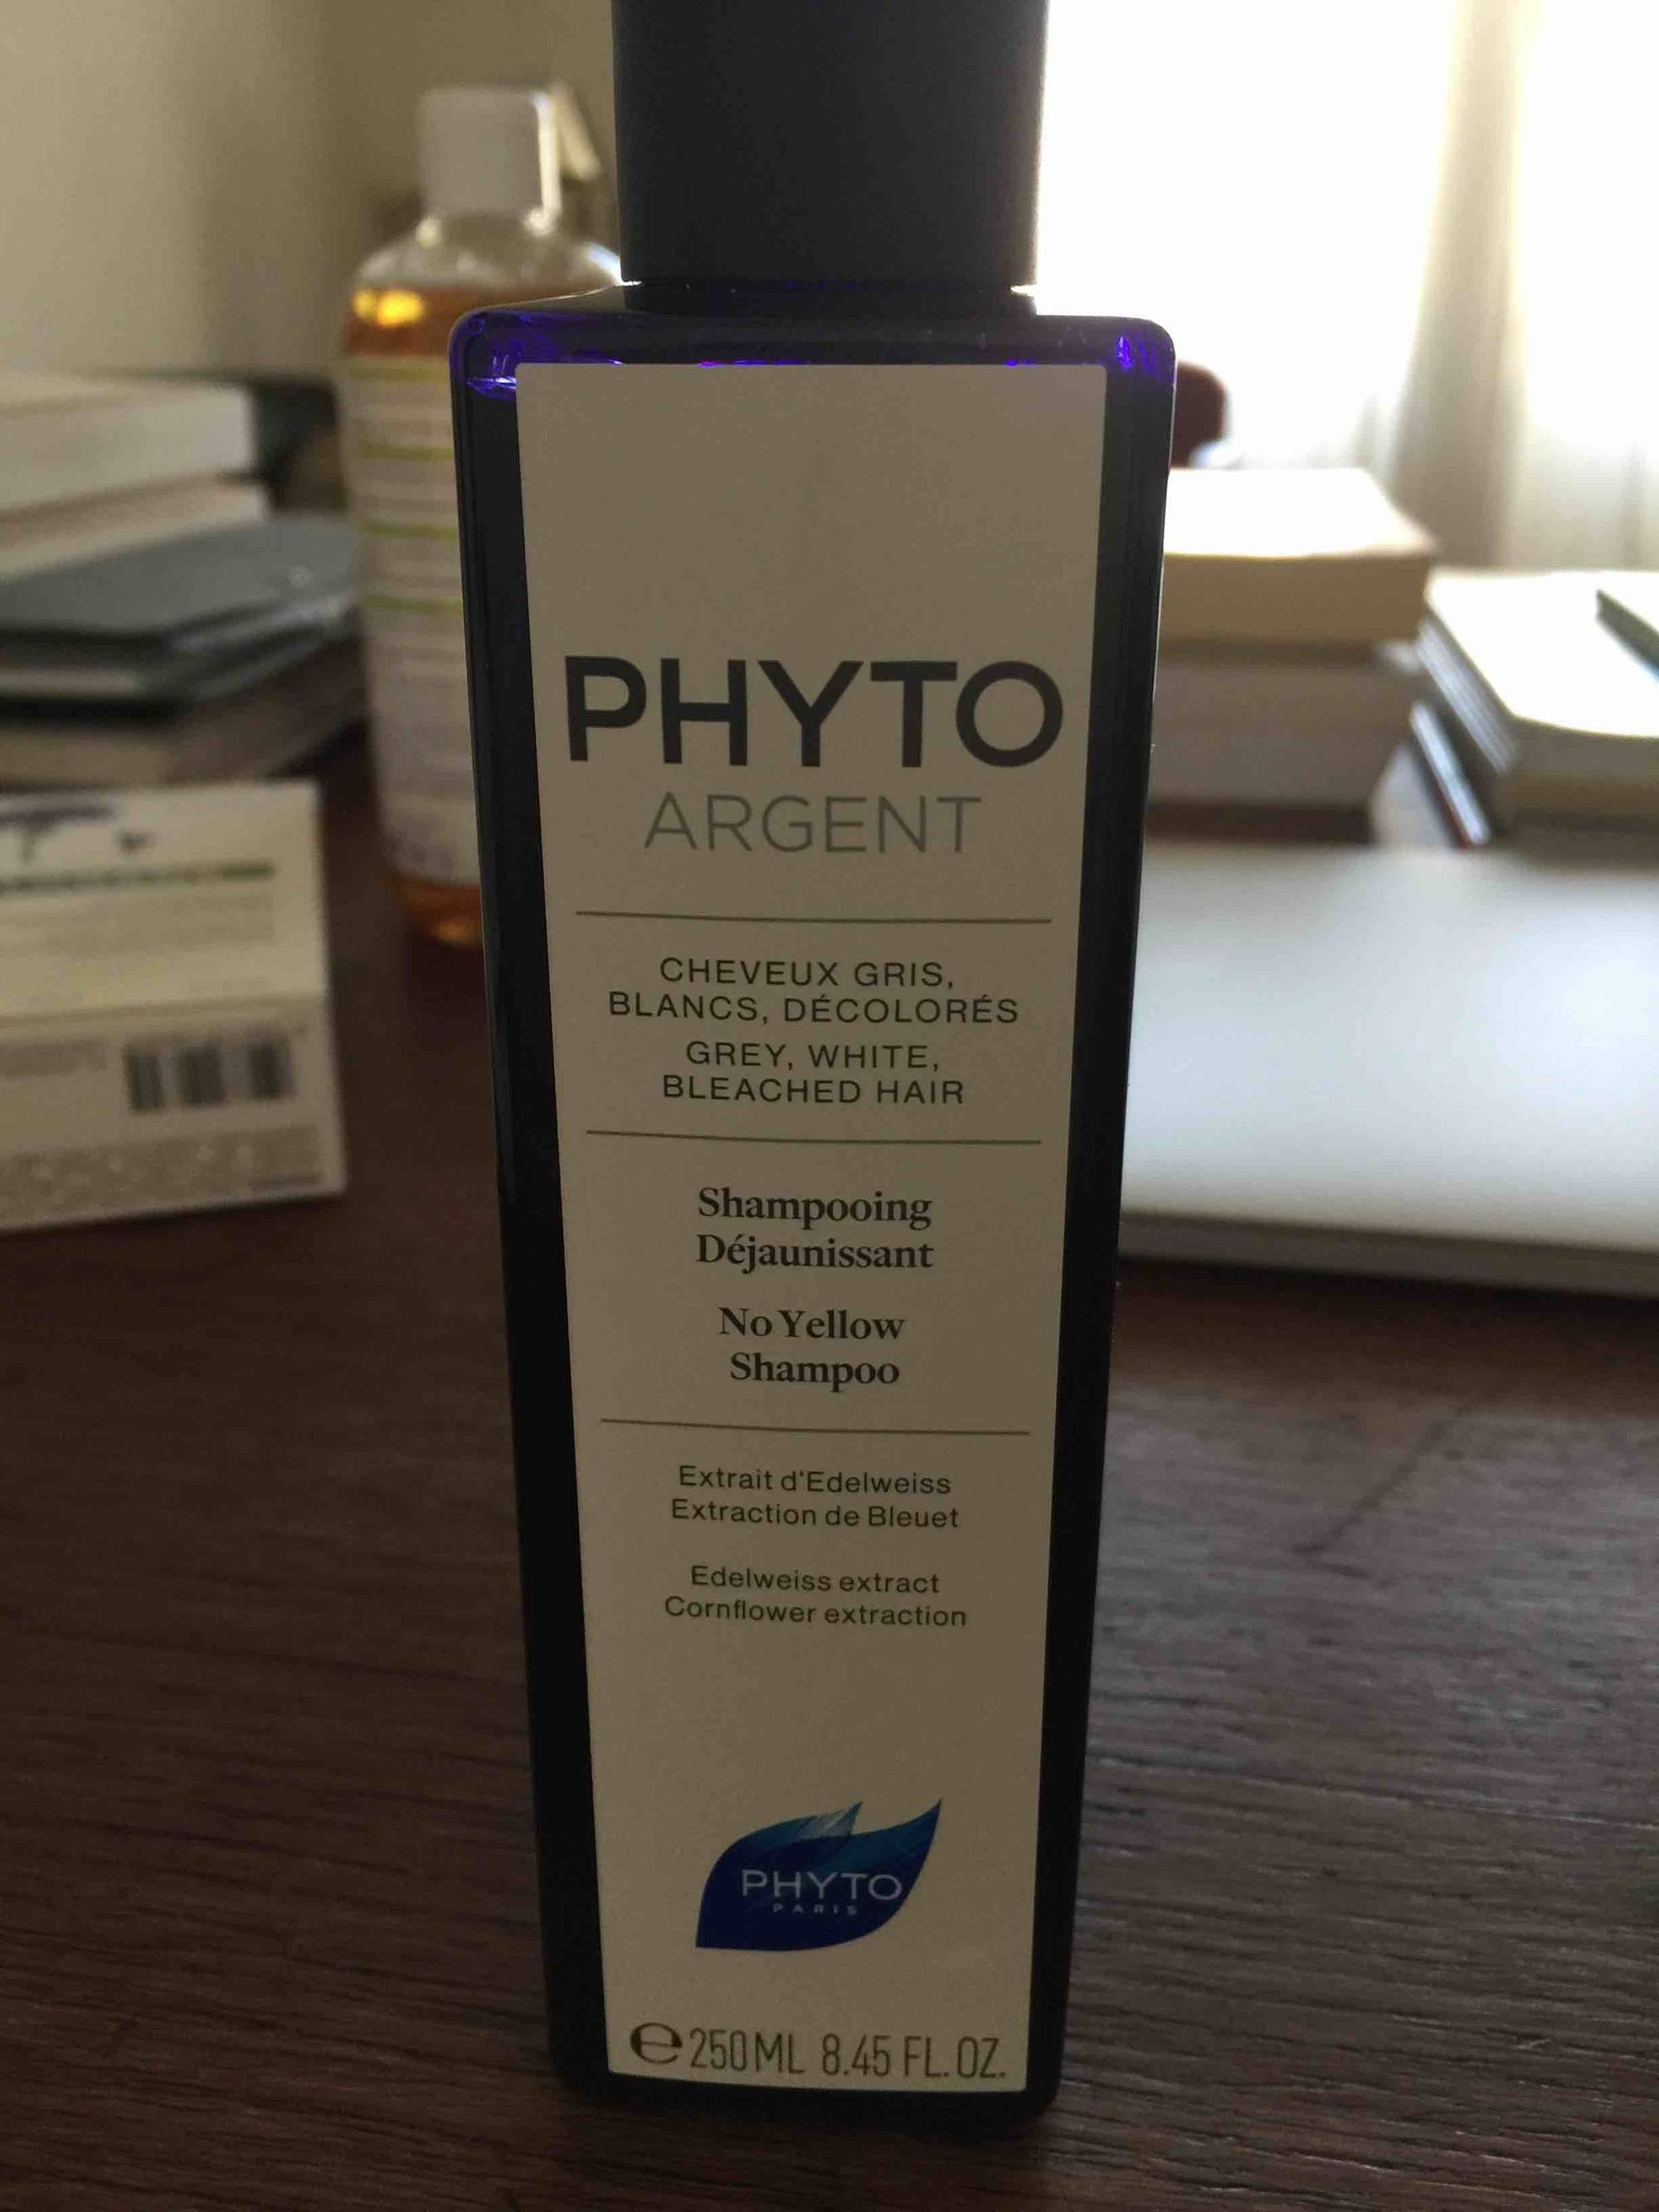 PHYTO - Phyto argent - Shampooing déjaunissant